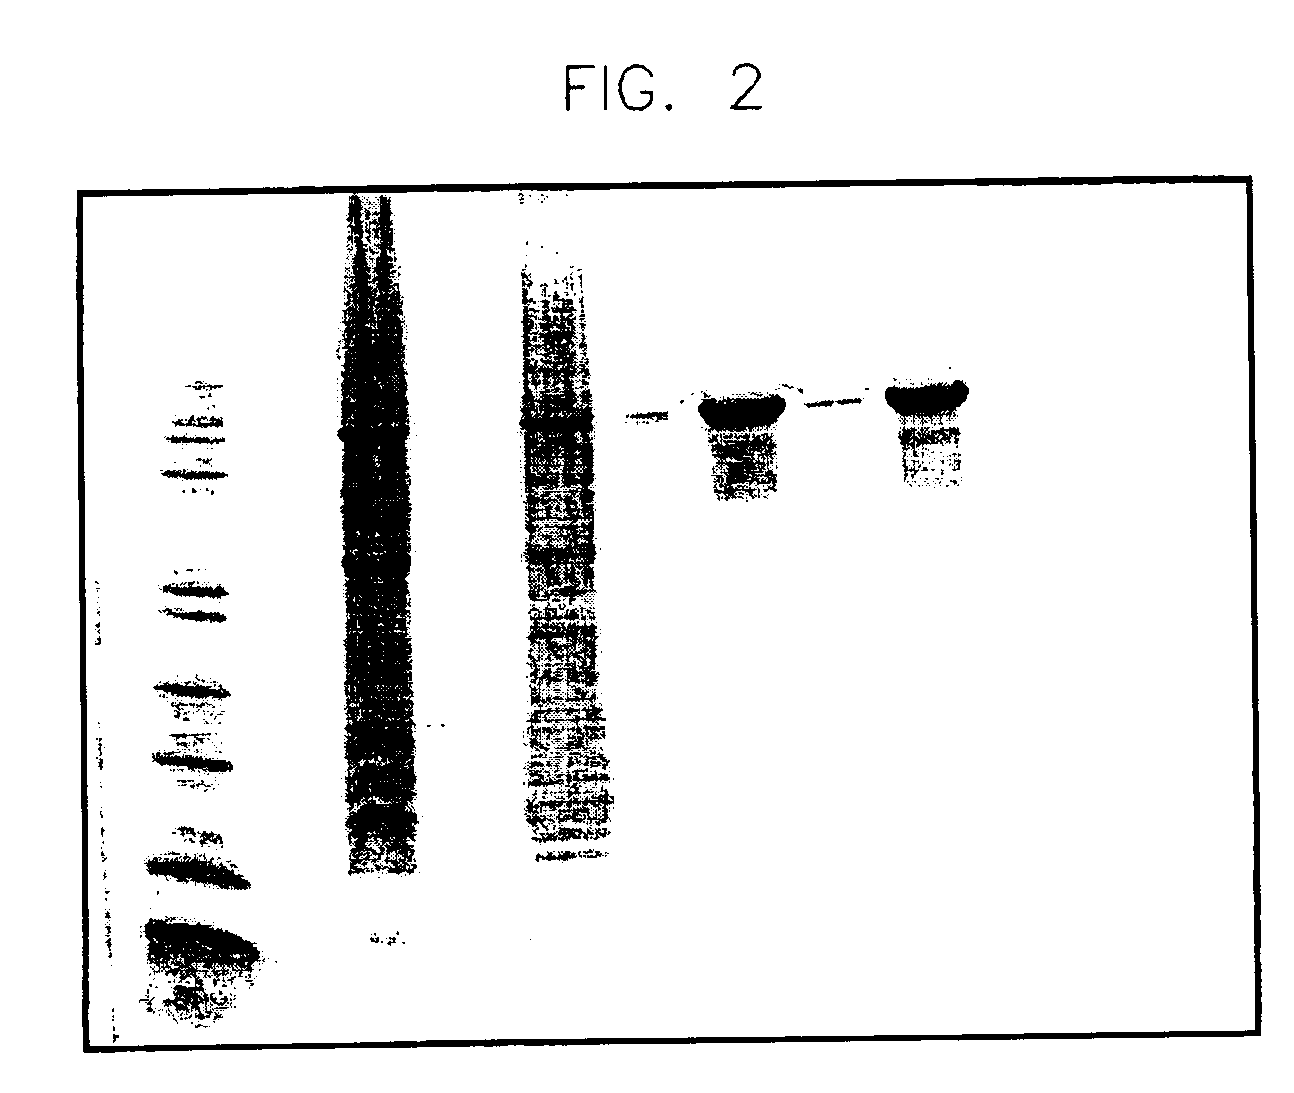 Complexes comprising a prion protein and a peptidyl prolyl isomerase chaperone, and method for producing and using them